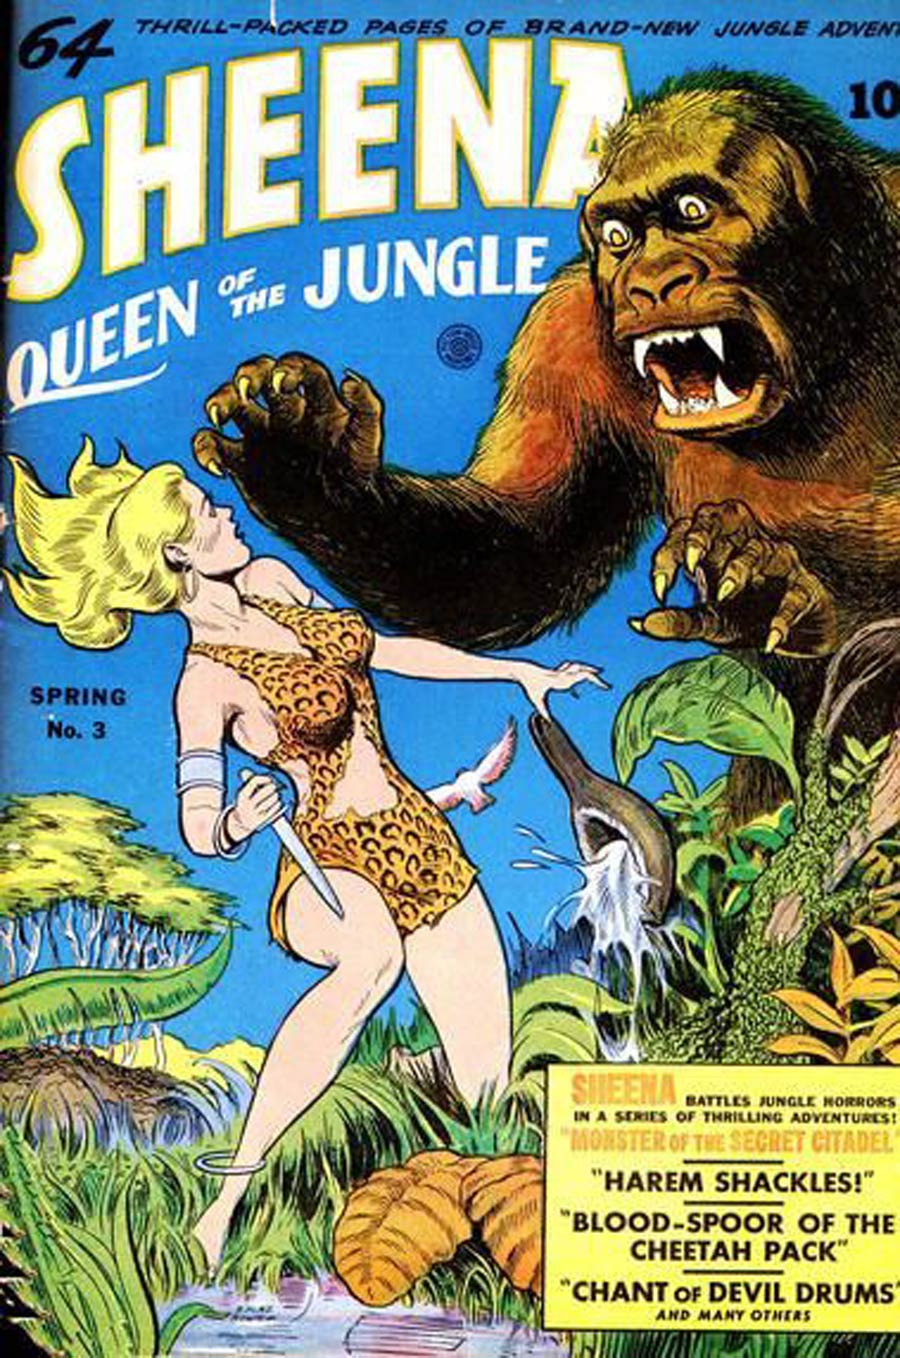 Sheena Queen Of The Jungle (Fiction House) #3